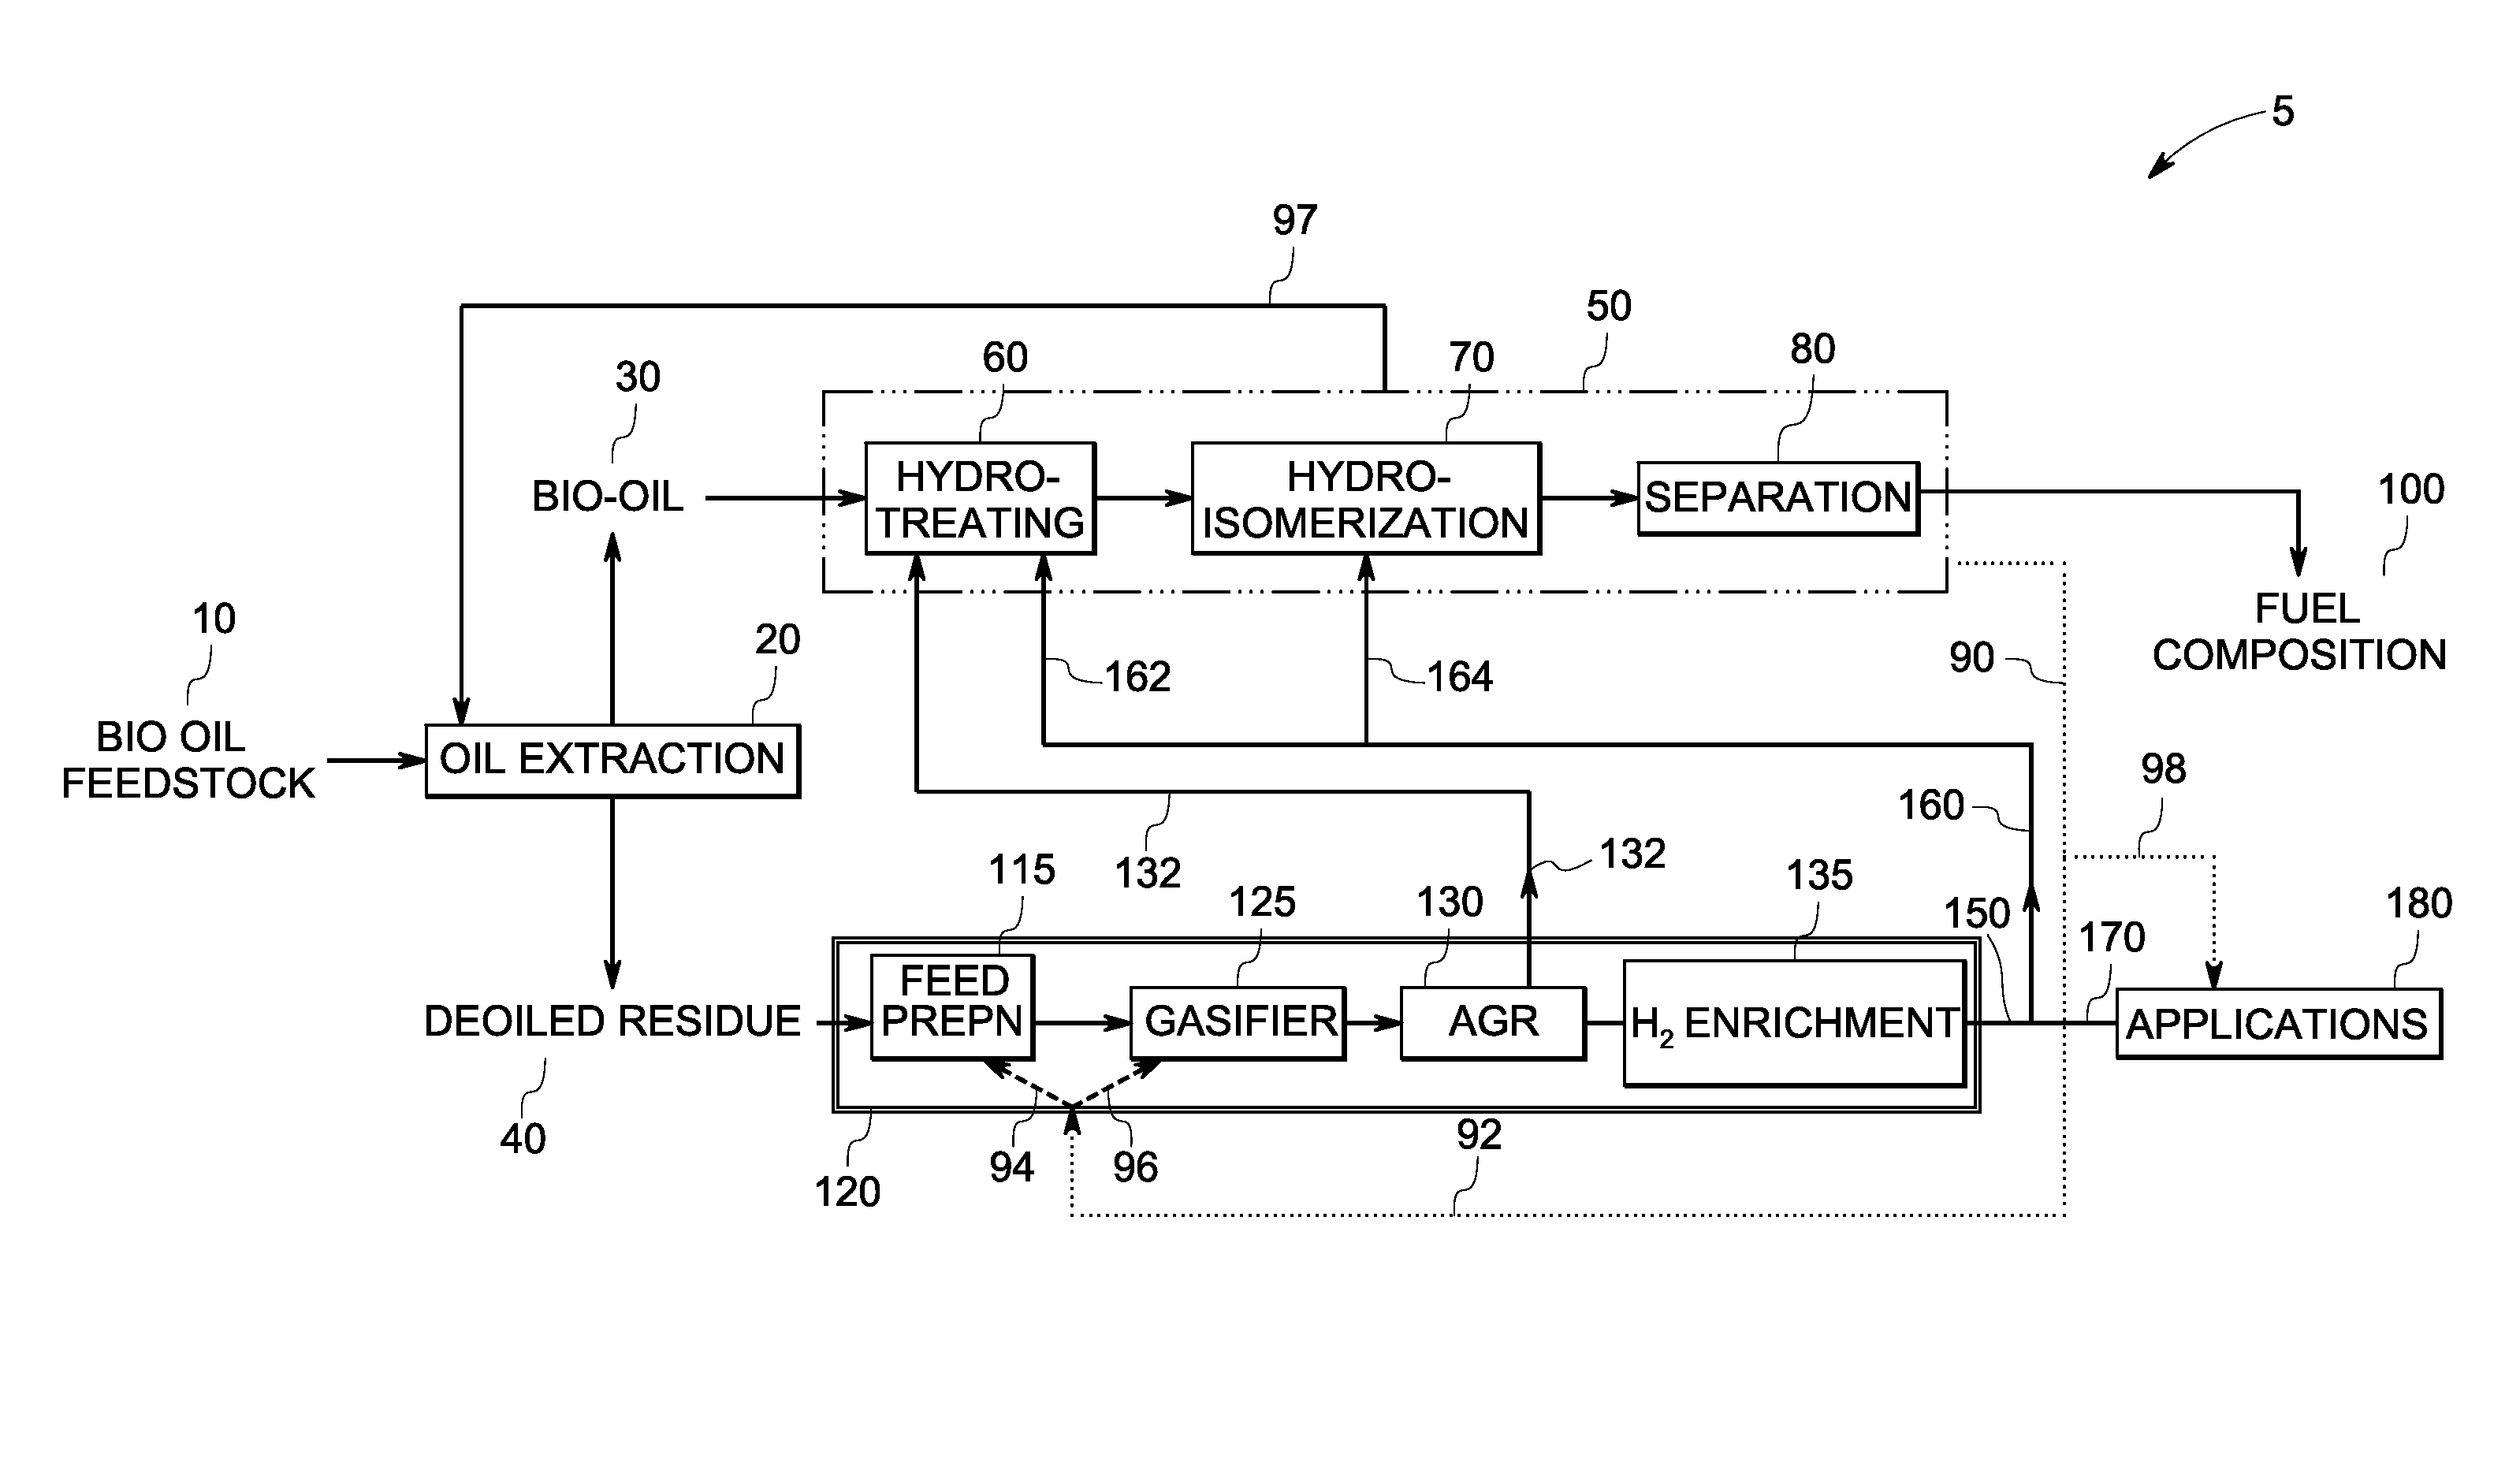 Integrated system and method for producing fuel composition from biomass